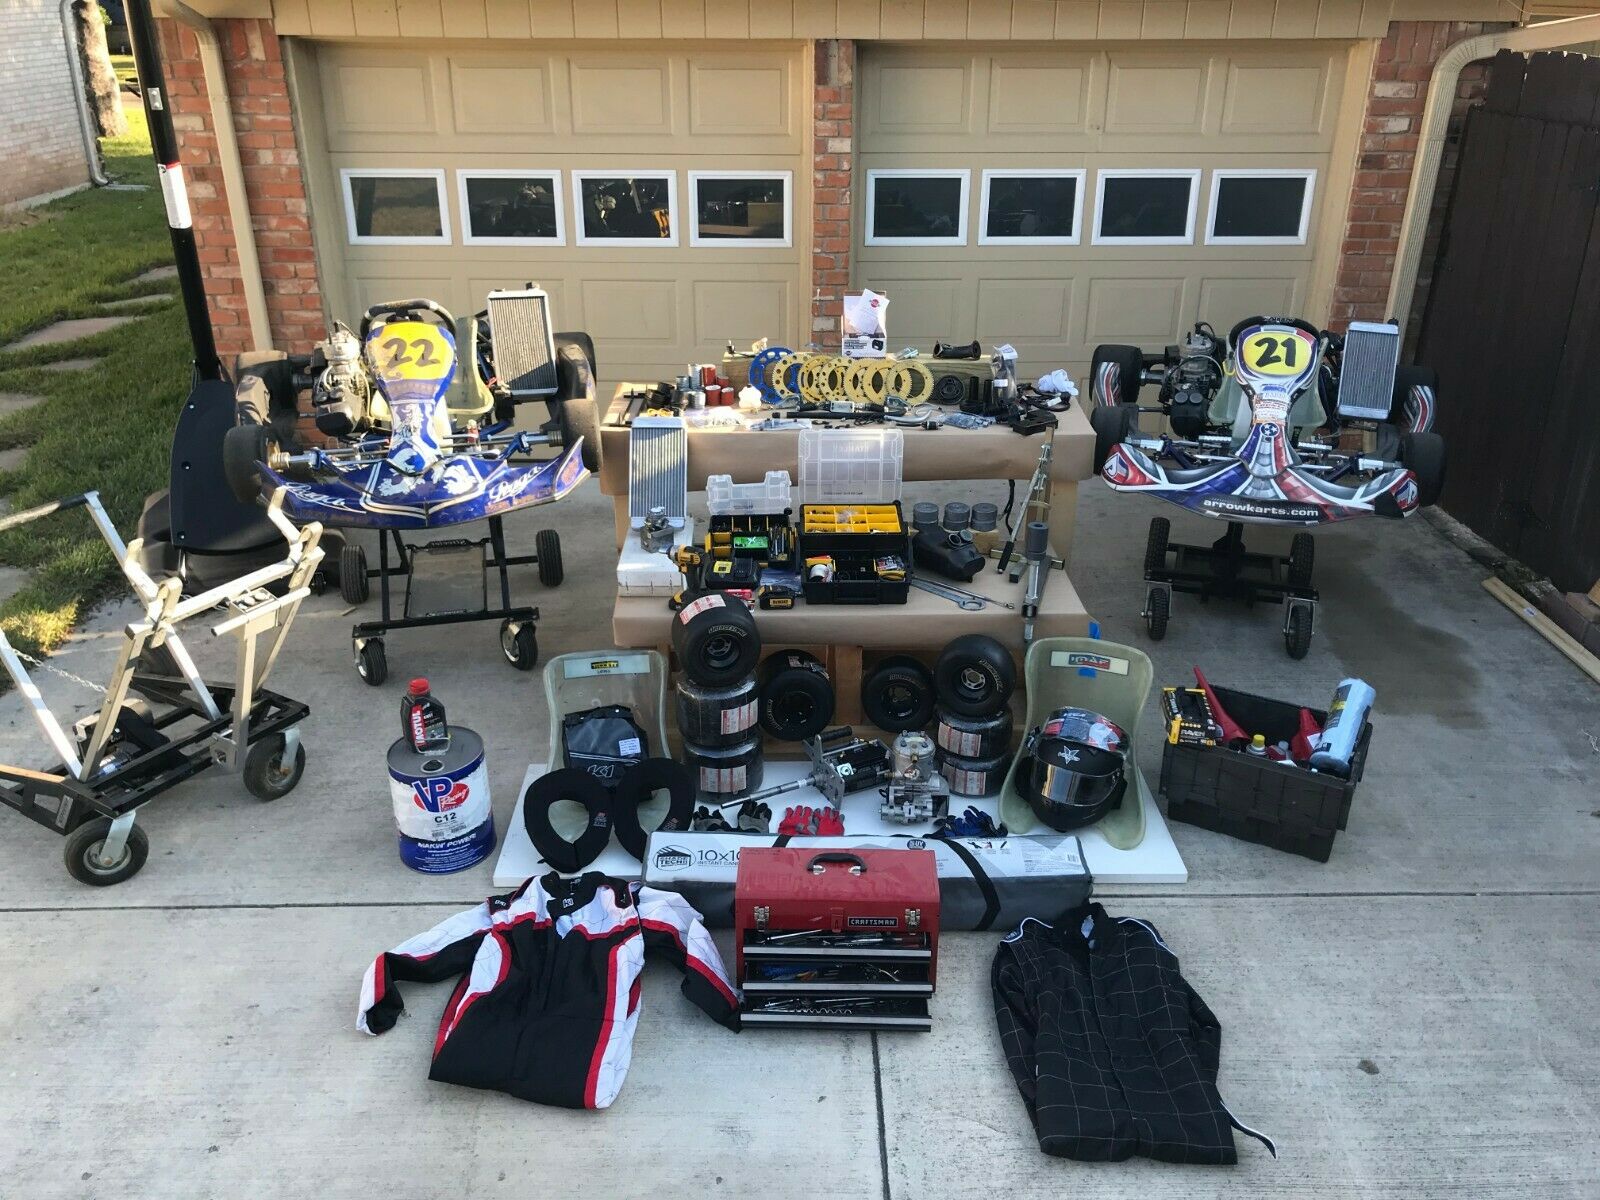 Deal Of The Century: Buy This Entire Two Kart Racing Operation With Spares, Firesuits, and Even Fuel For Less Than $10K!